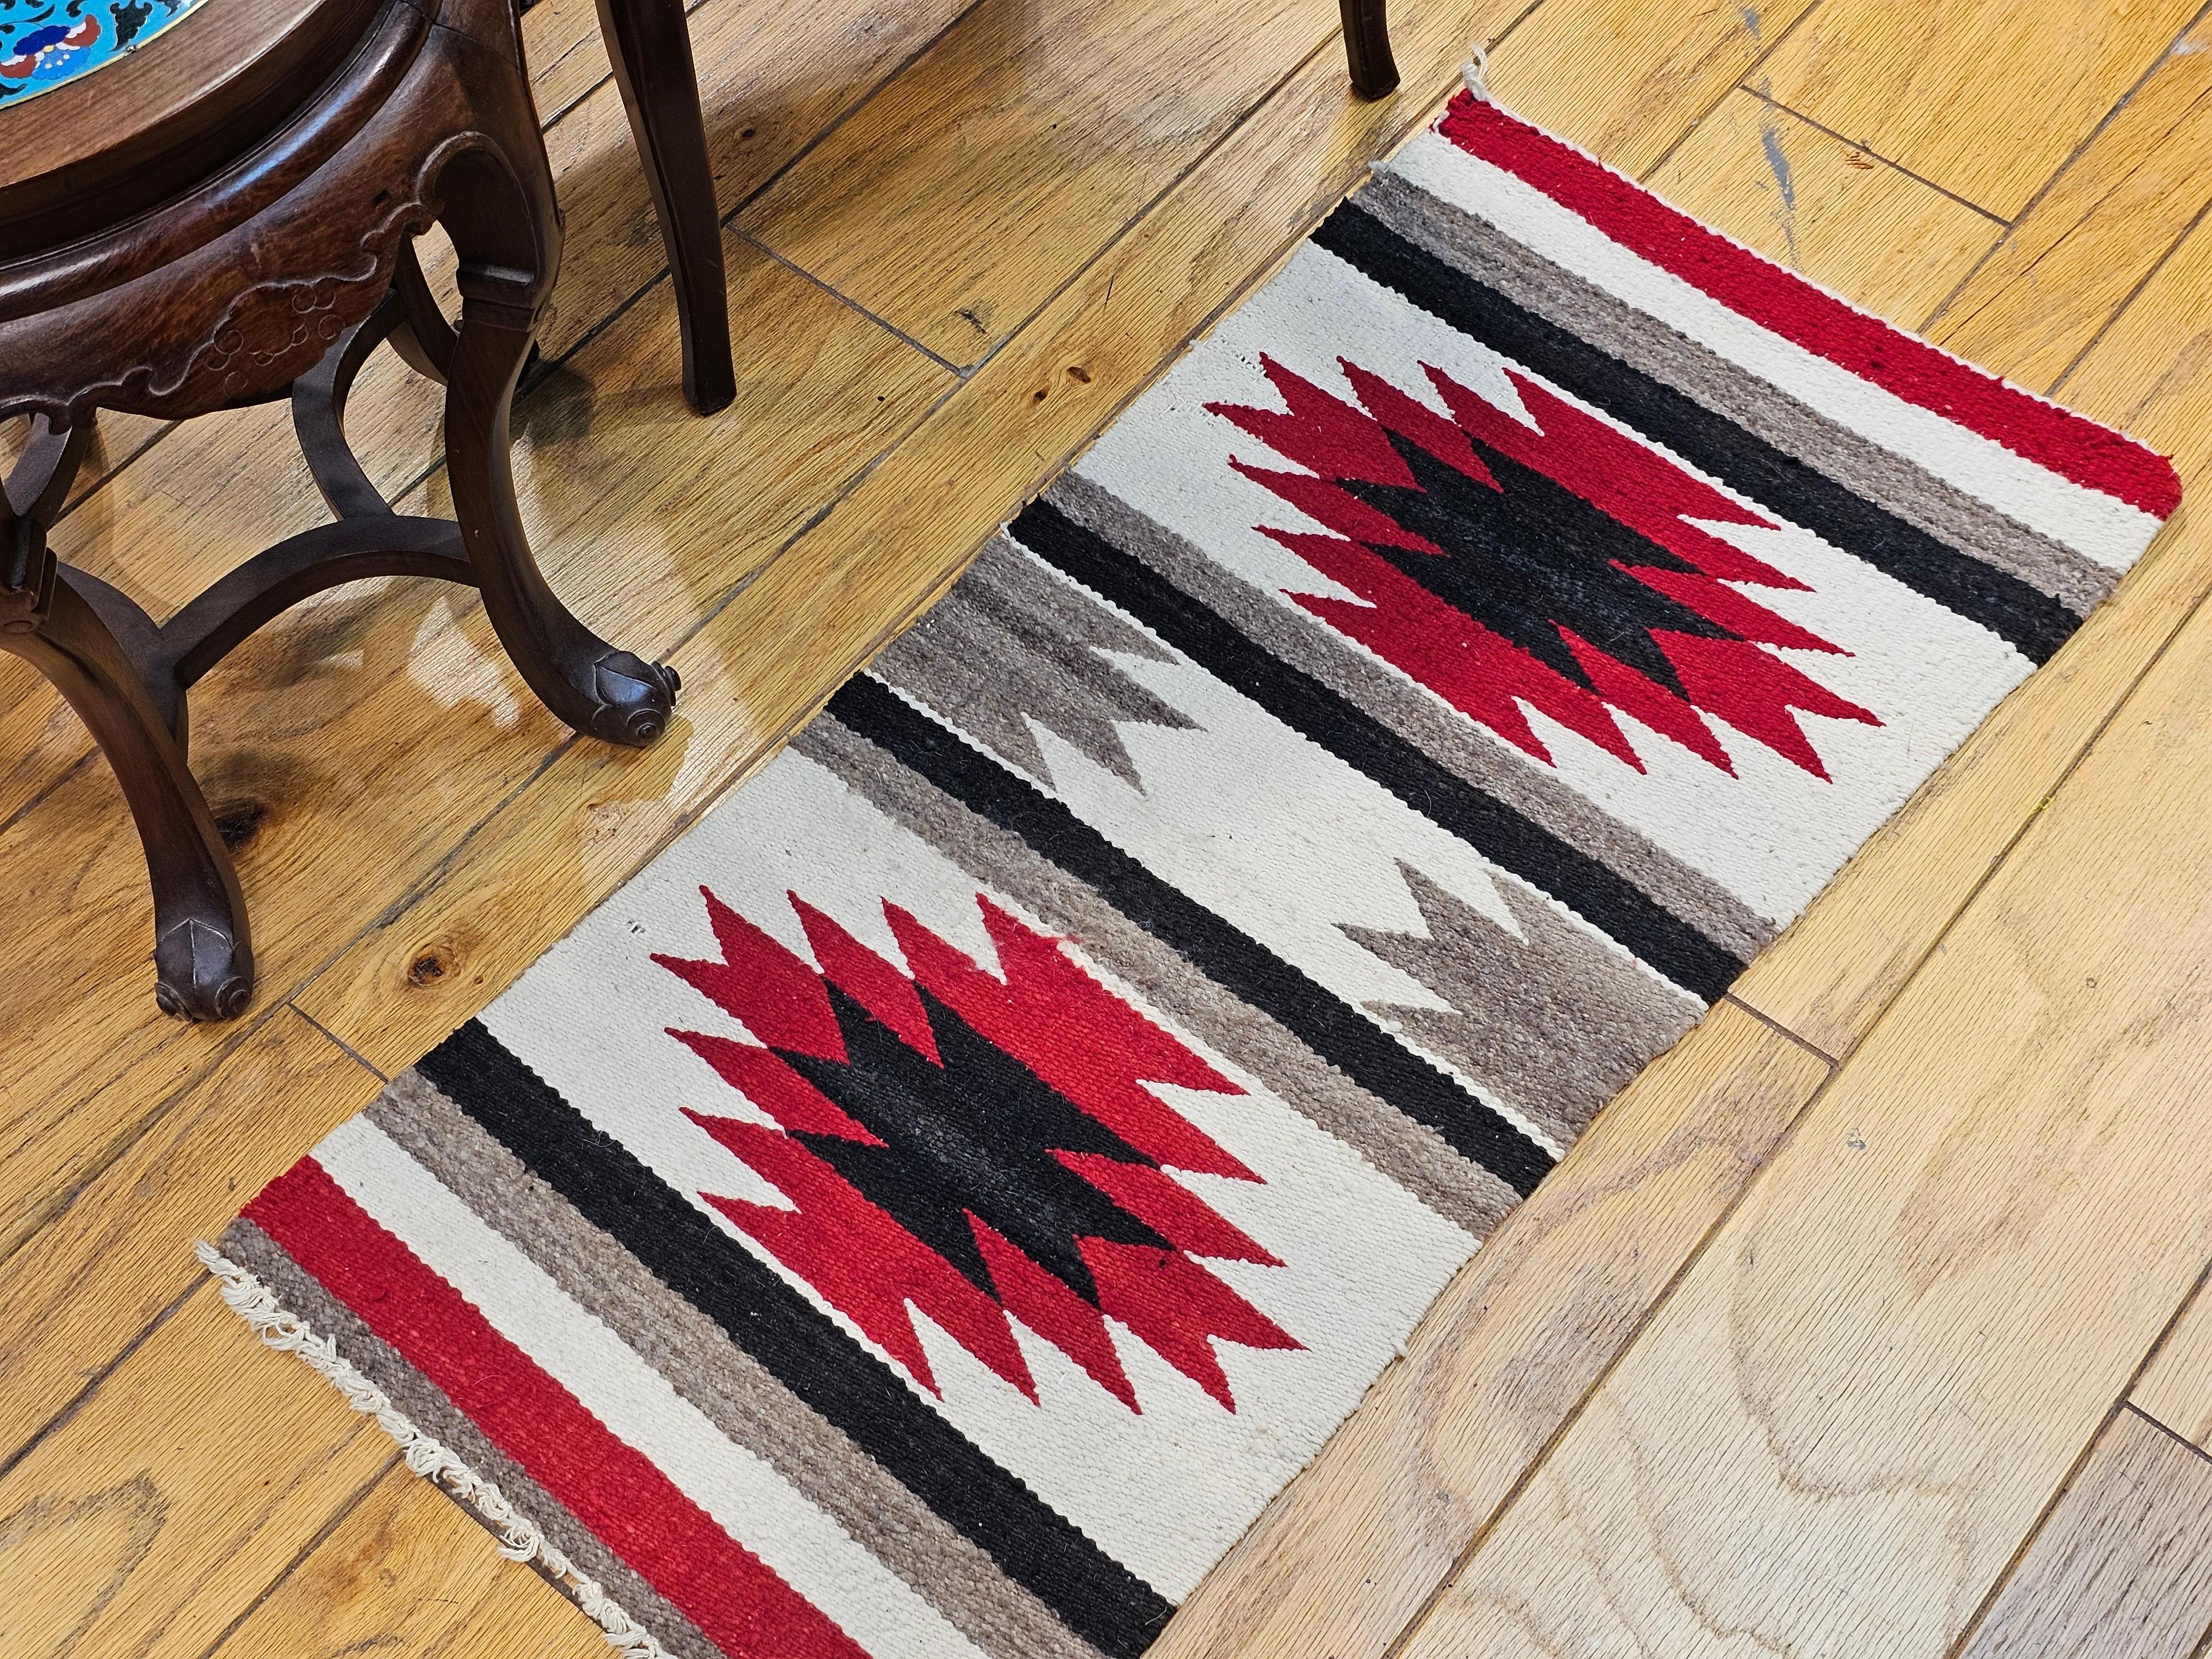 Hand-Woven Vintage Native American Navajo Area Rug in Ivory, Red, Black, Gray